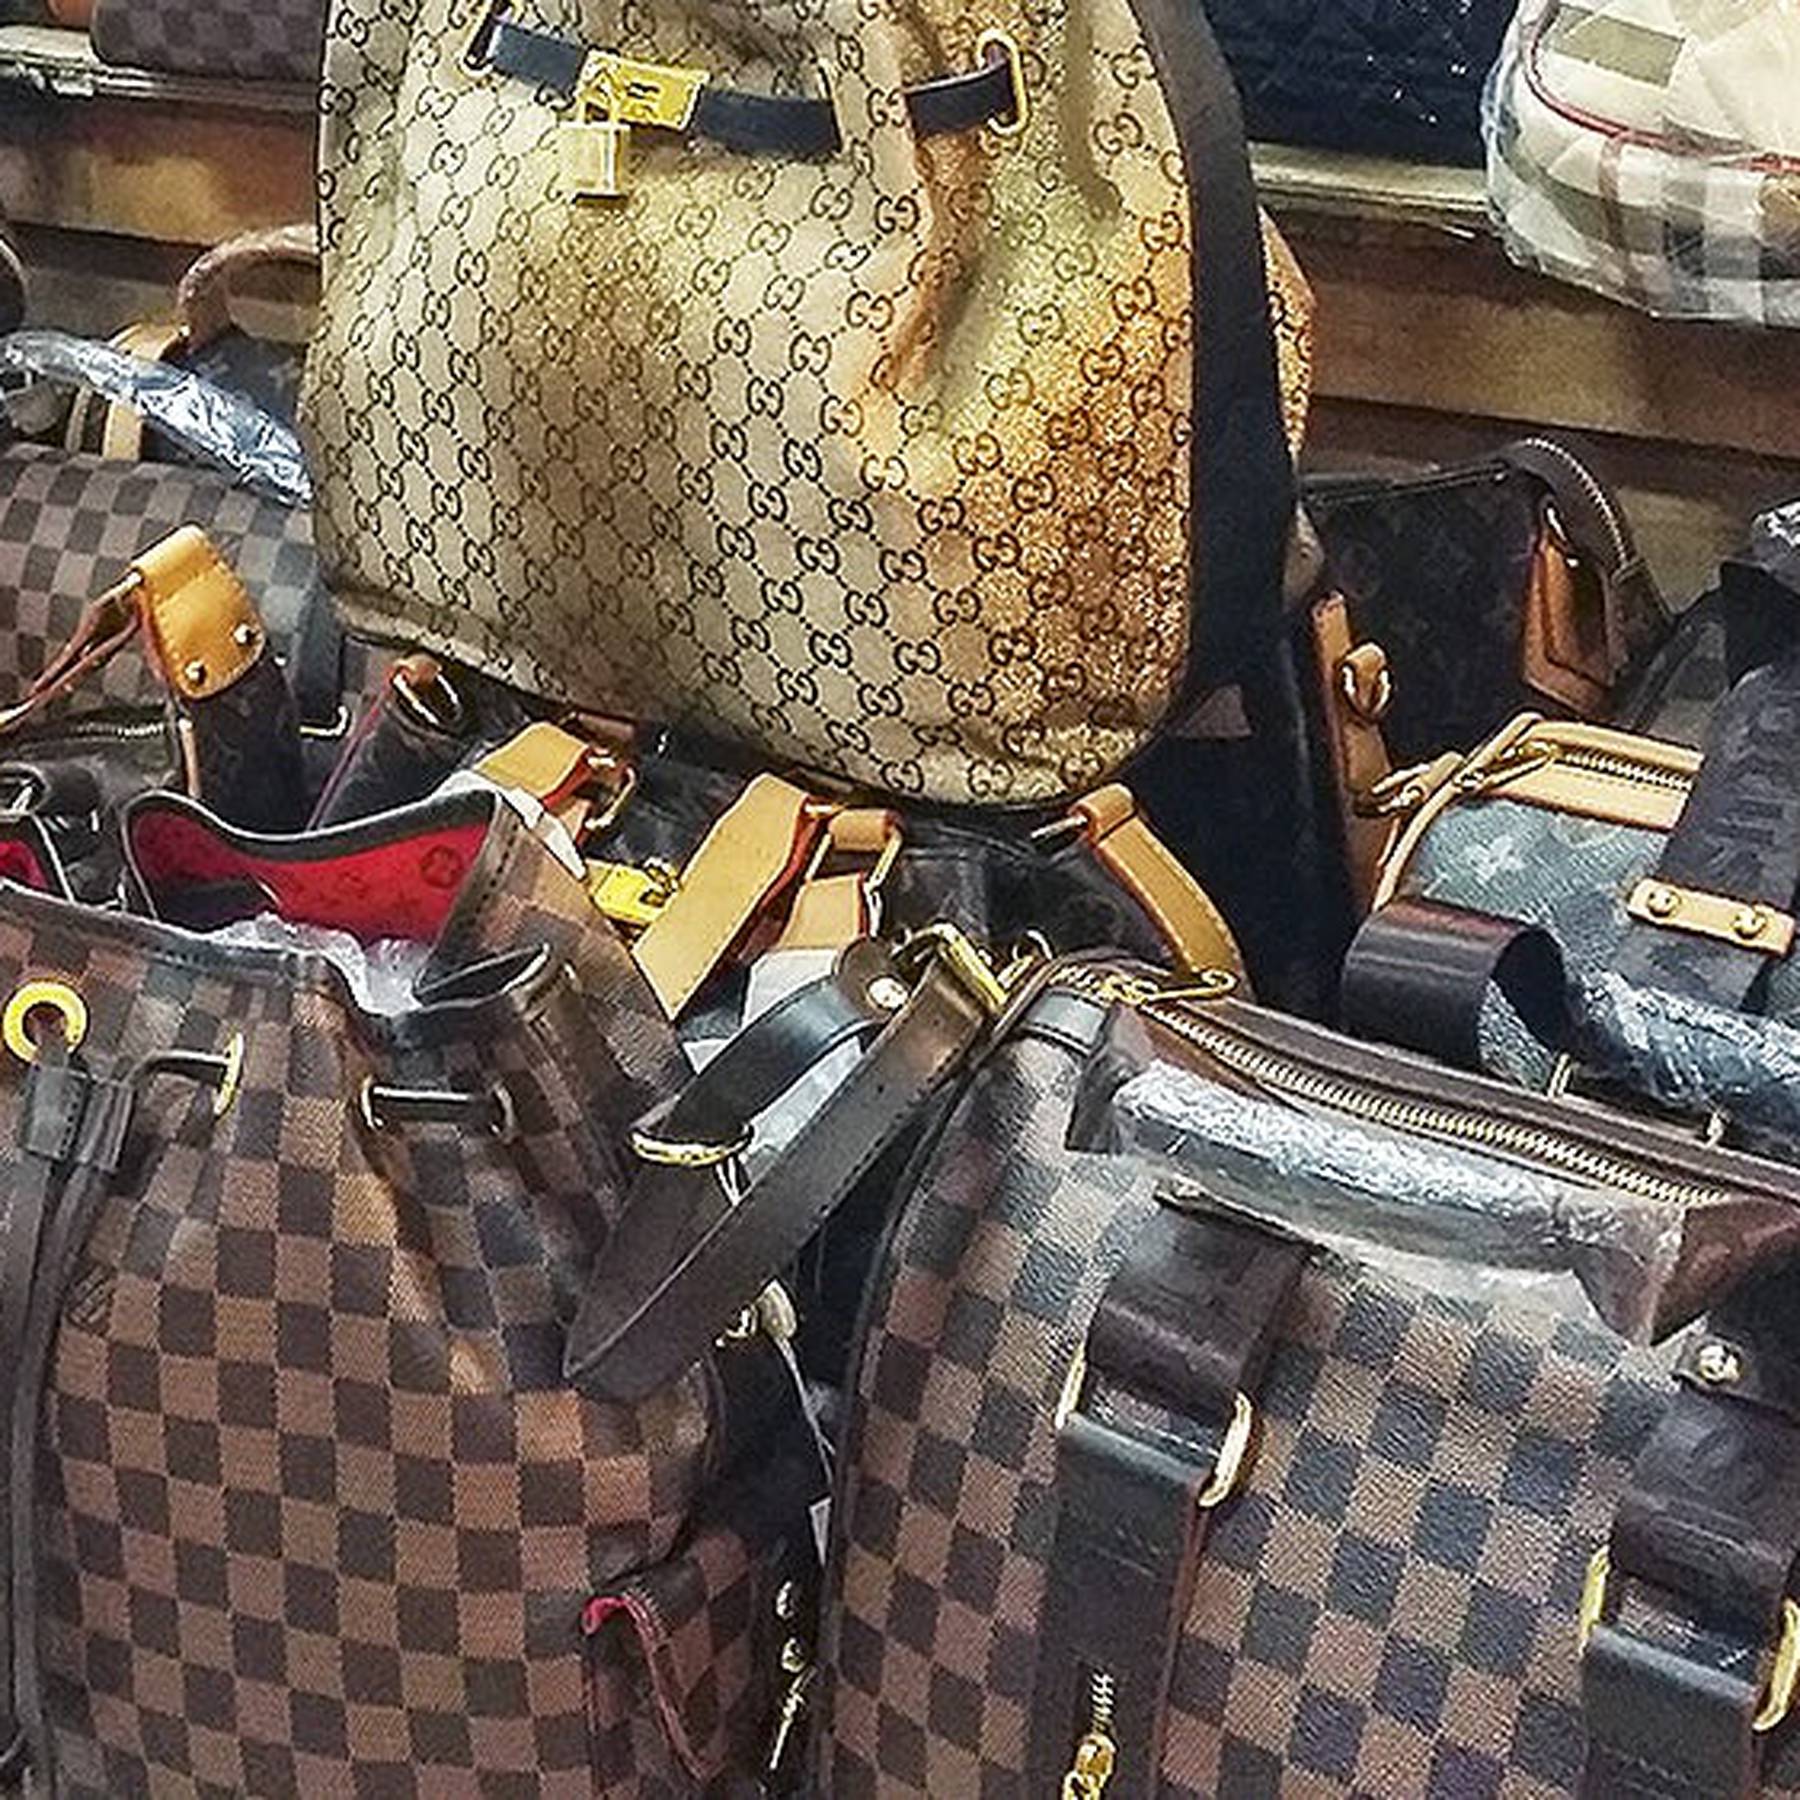 louis vuitton and gucci bags